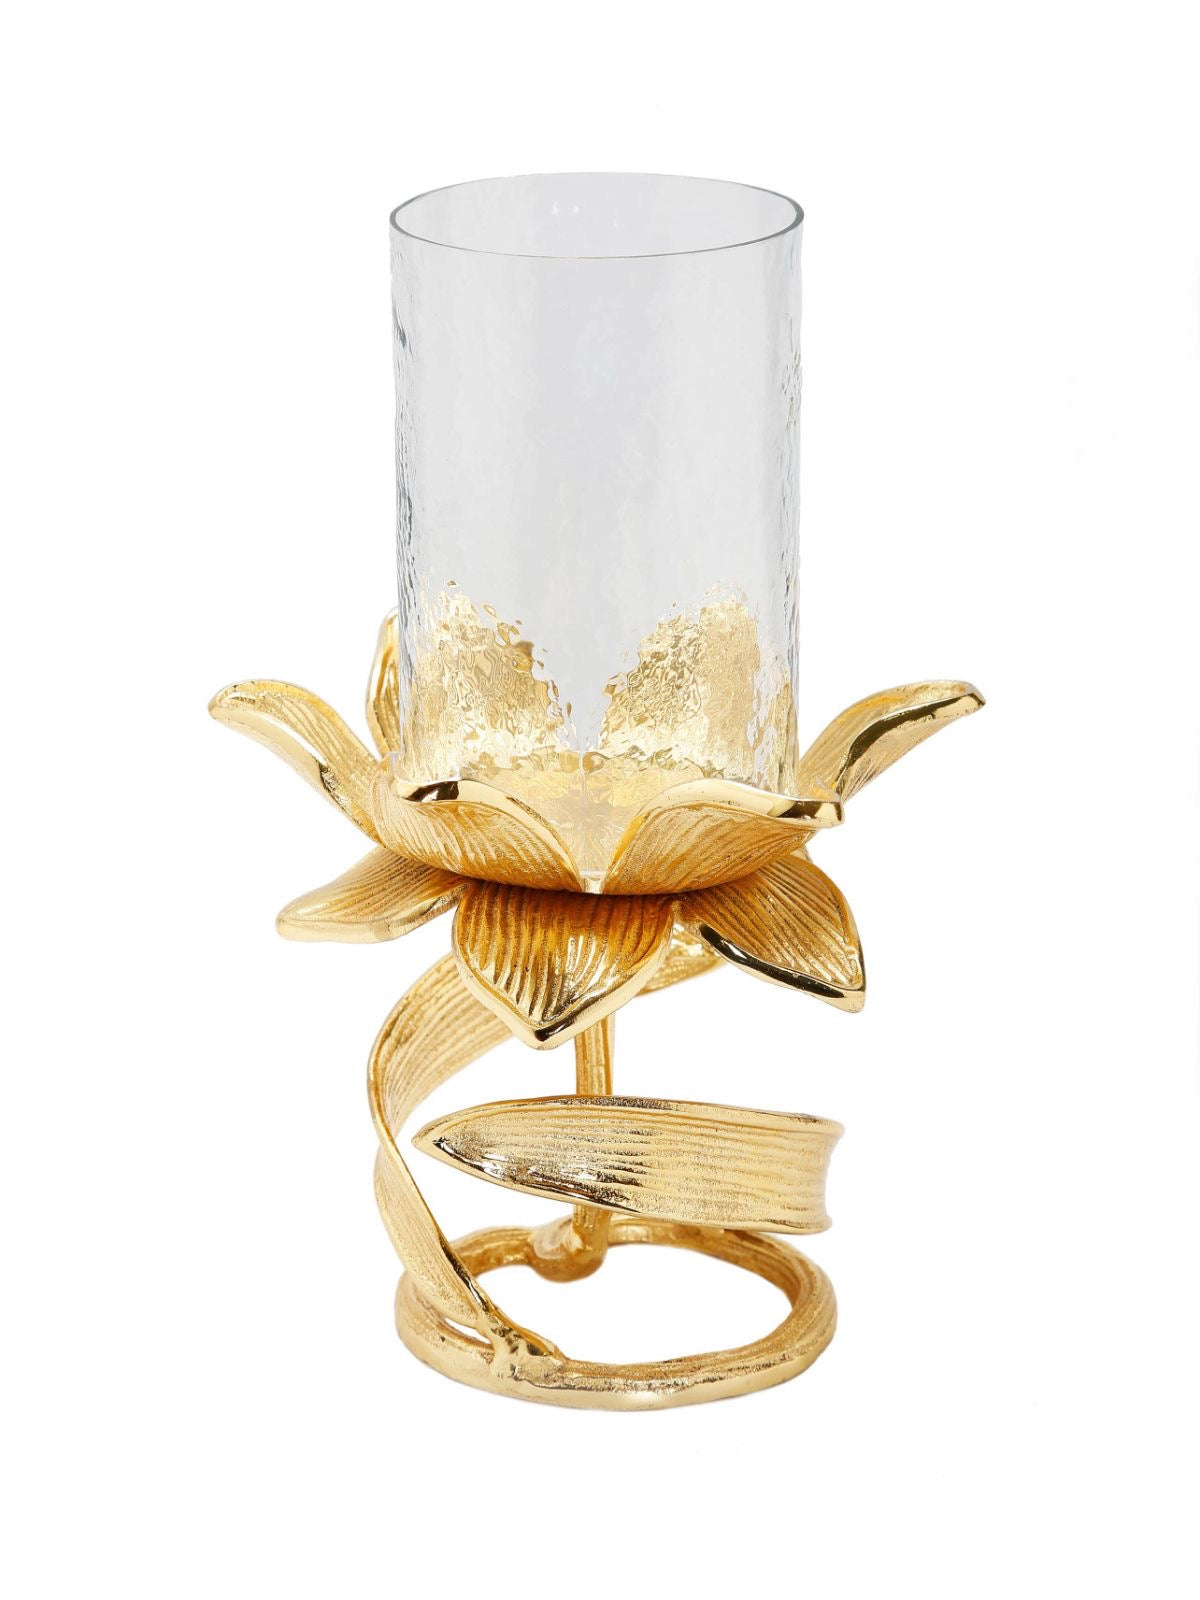 15.75H Hammered Glass Candle Holders on Gold Stainless Steel Floral Stand. Sold by KYA Home Decor.